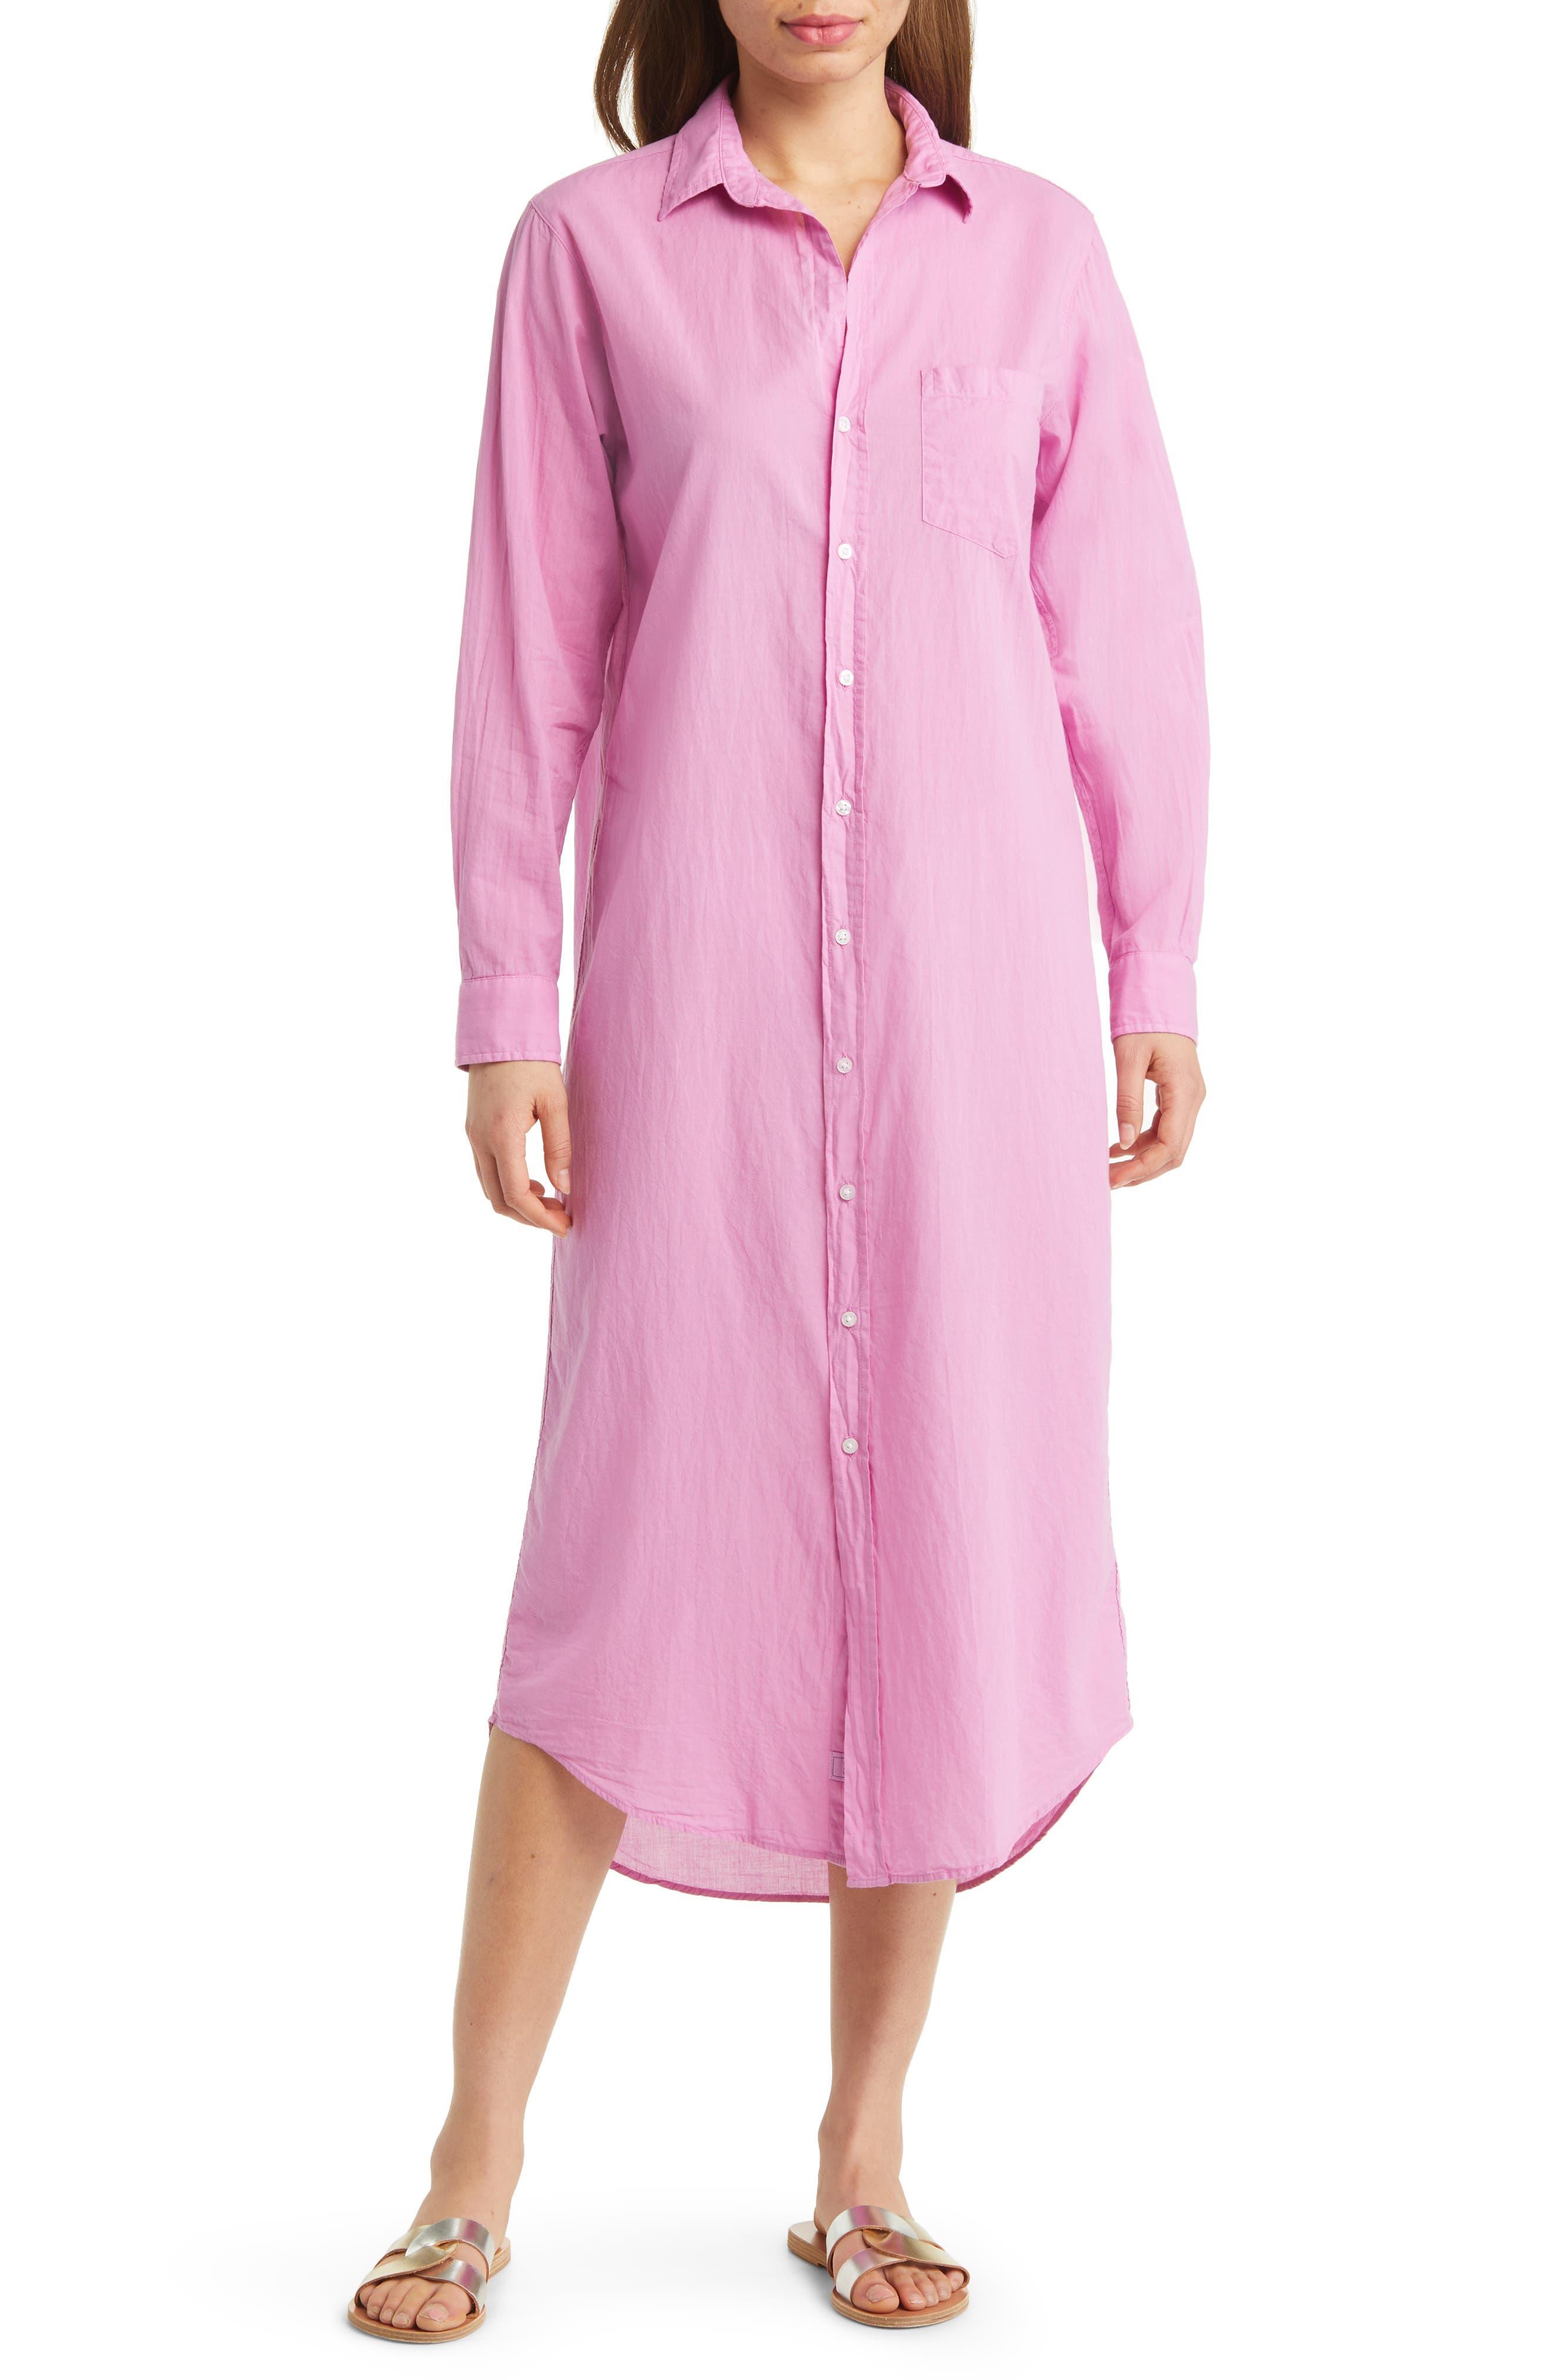 Frank & Eileen Rory Button-up Organic Cotton Maxi Shirtdress in Pink | Lyst